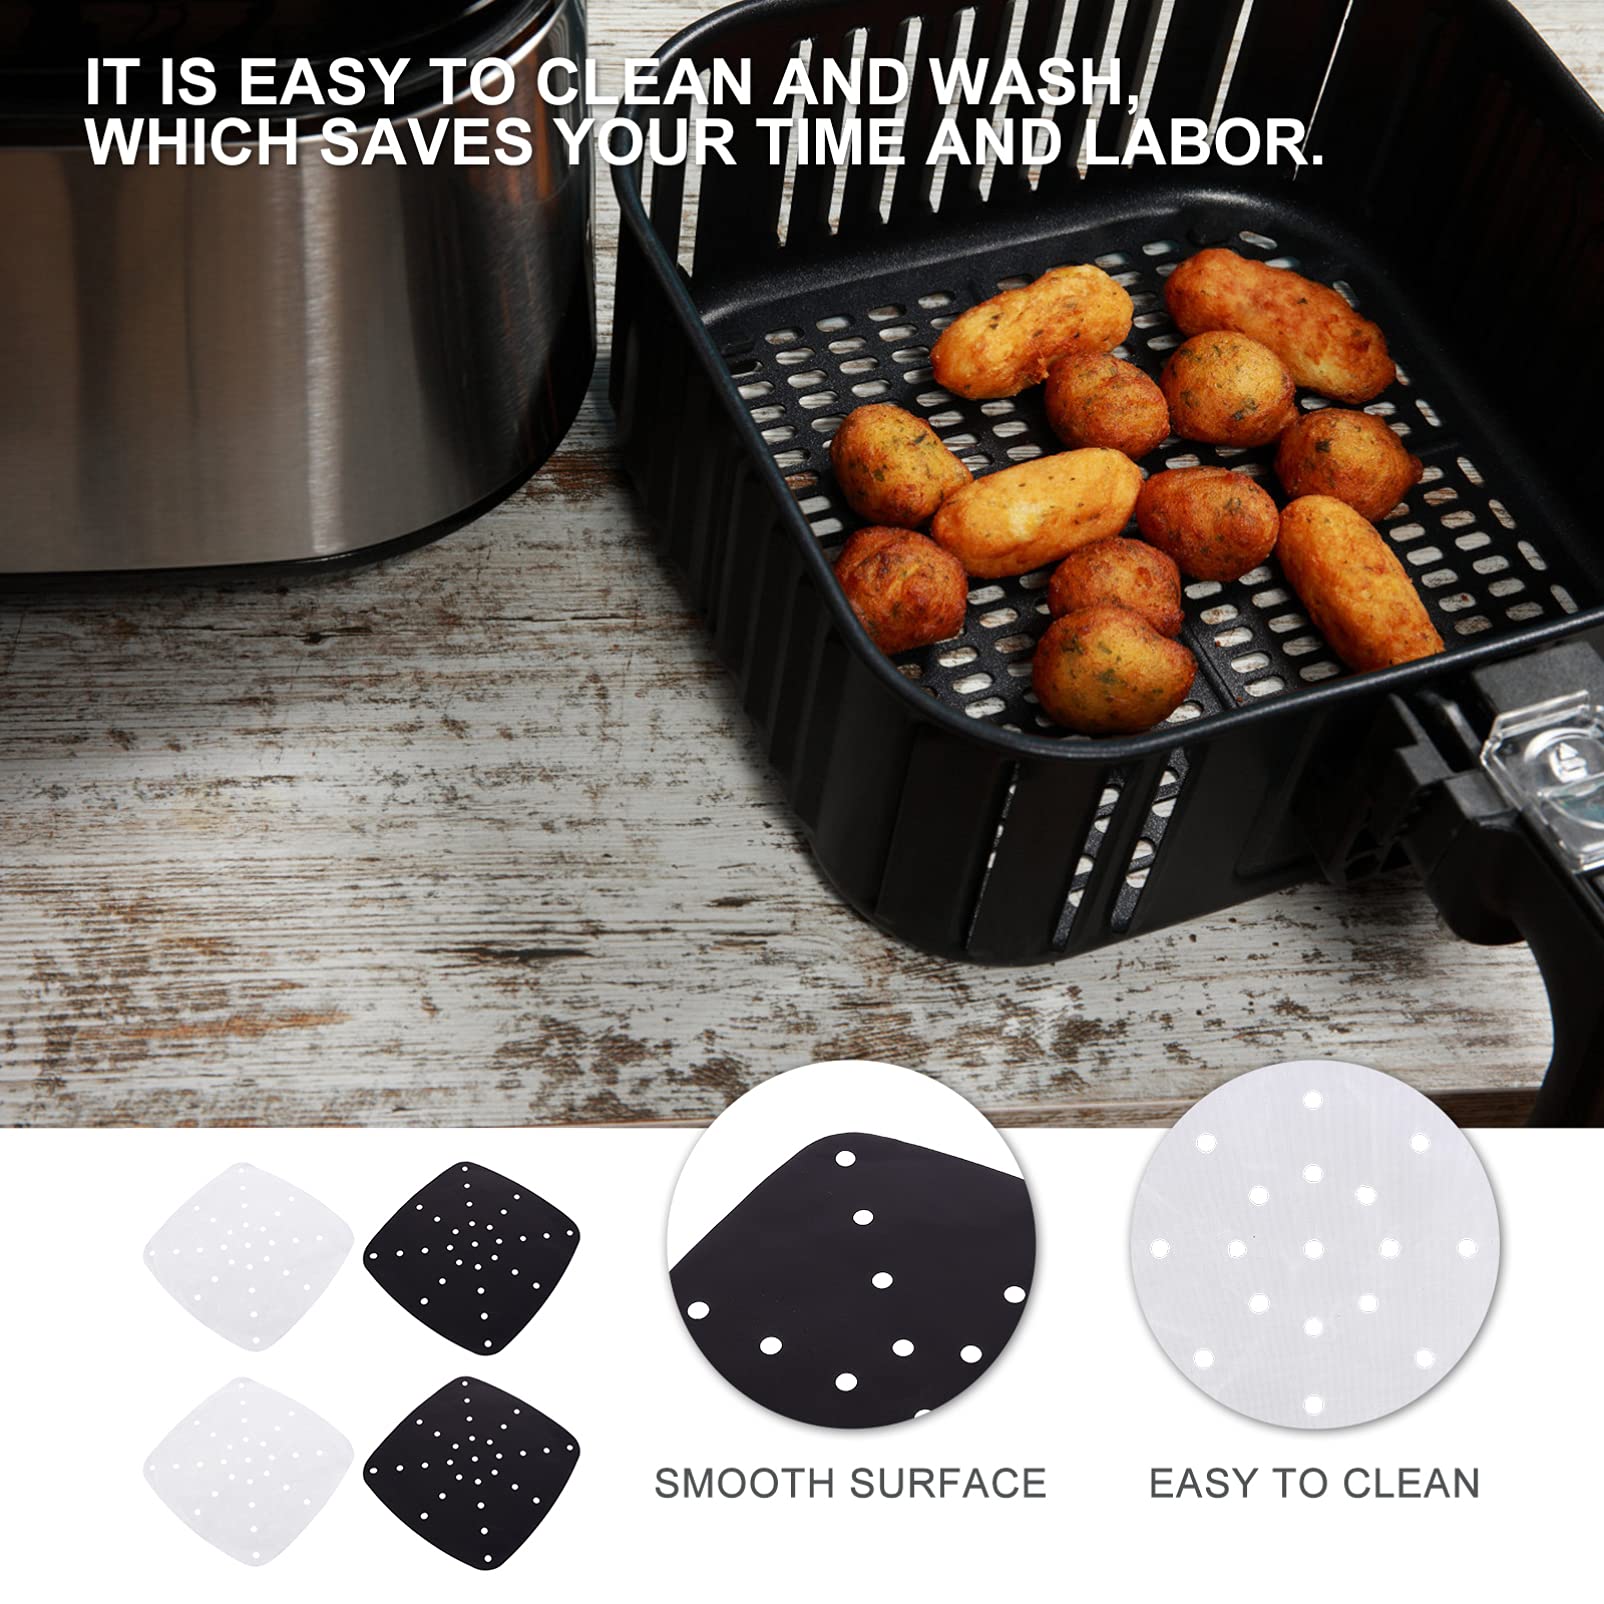 Hemoton 8 Pcs Air Fryer Pad Airfryer Air Fryers Round Steamer Liner Perforated Baking Pad Air Fryer Parchment Oven Steamer Patch Mat for Air Fryer Non-stick Mat Tray